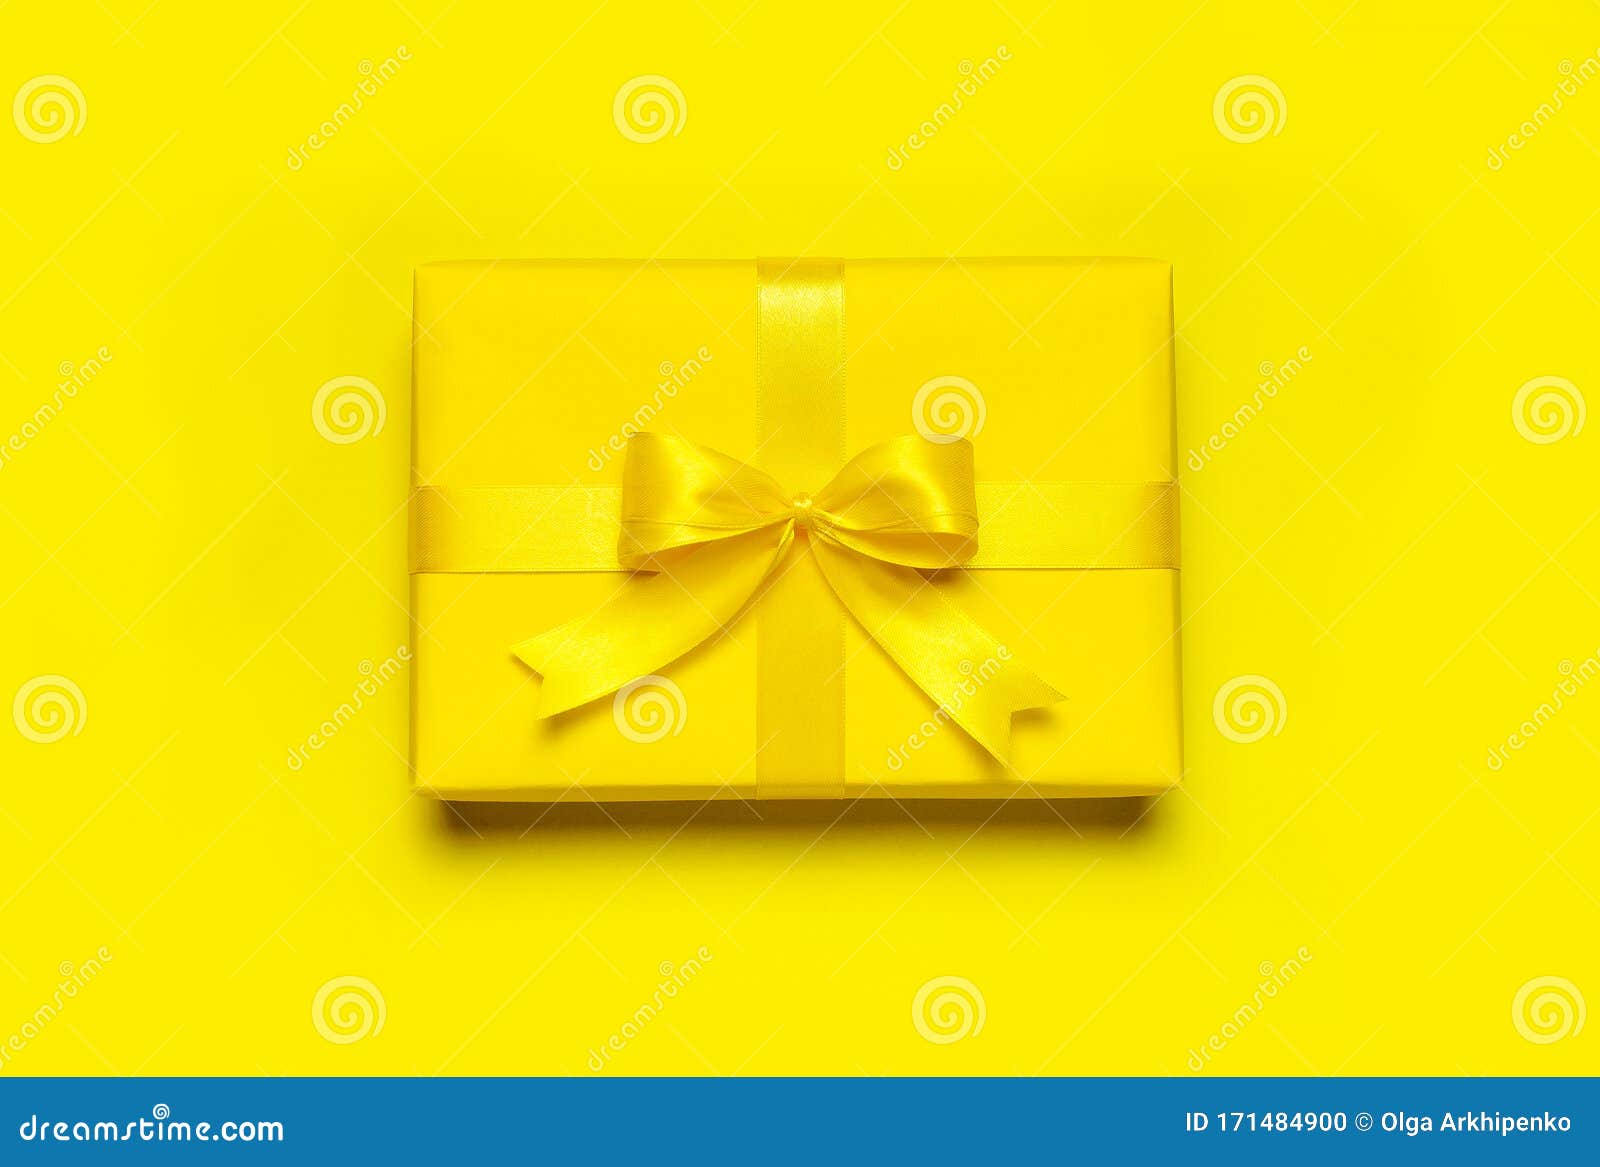 Bright Yellow Gift Present Box With Ribbon And Bow On